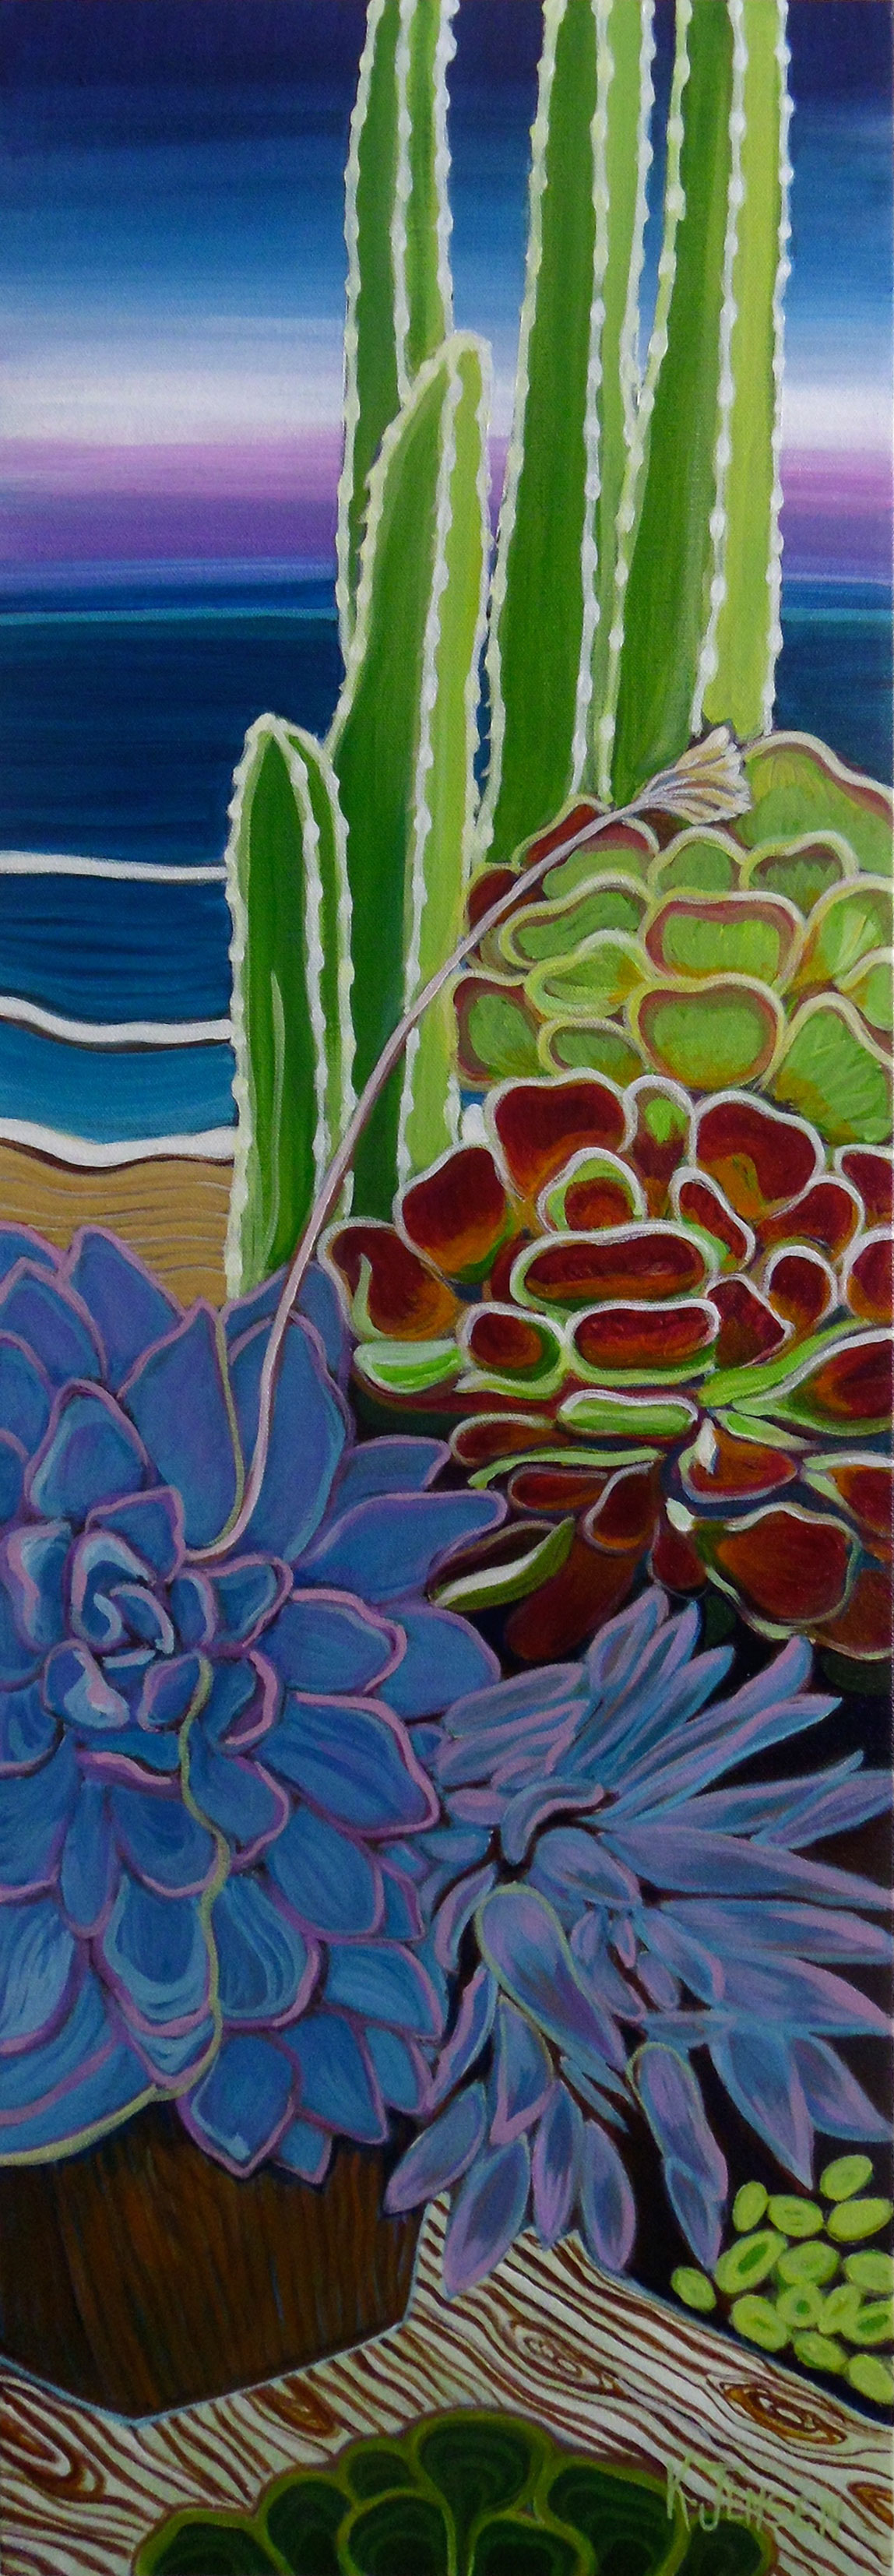 Succulents by the Sea